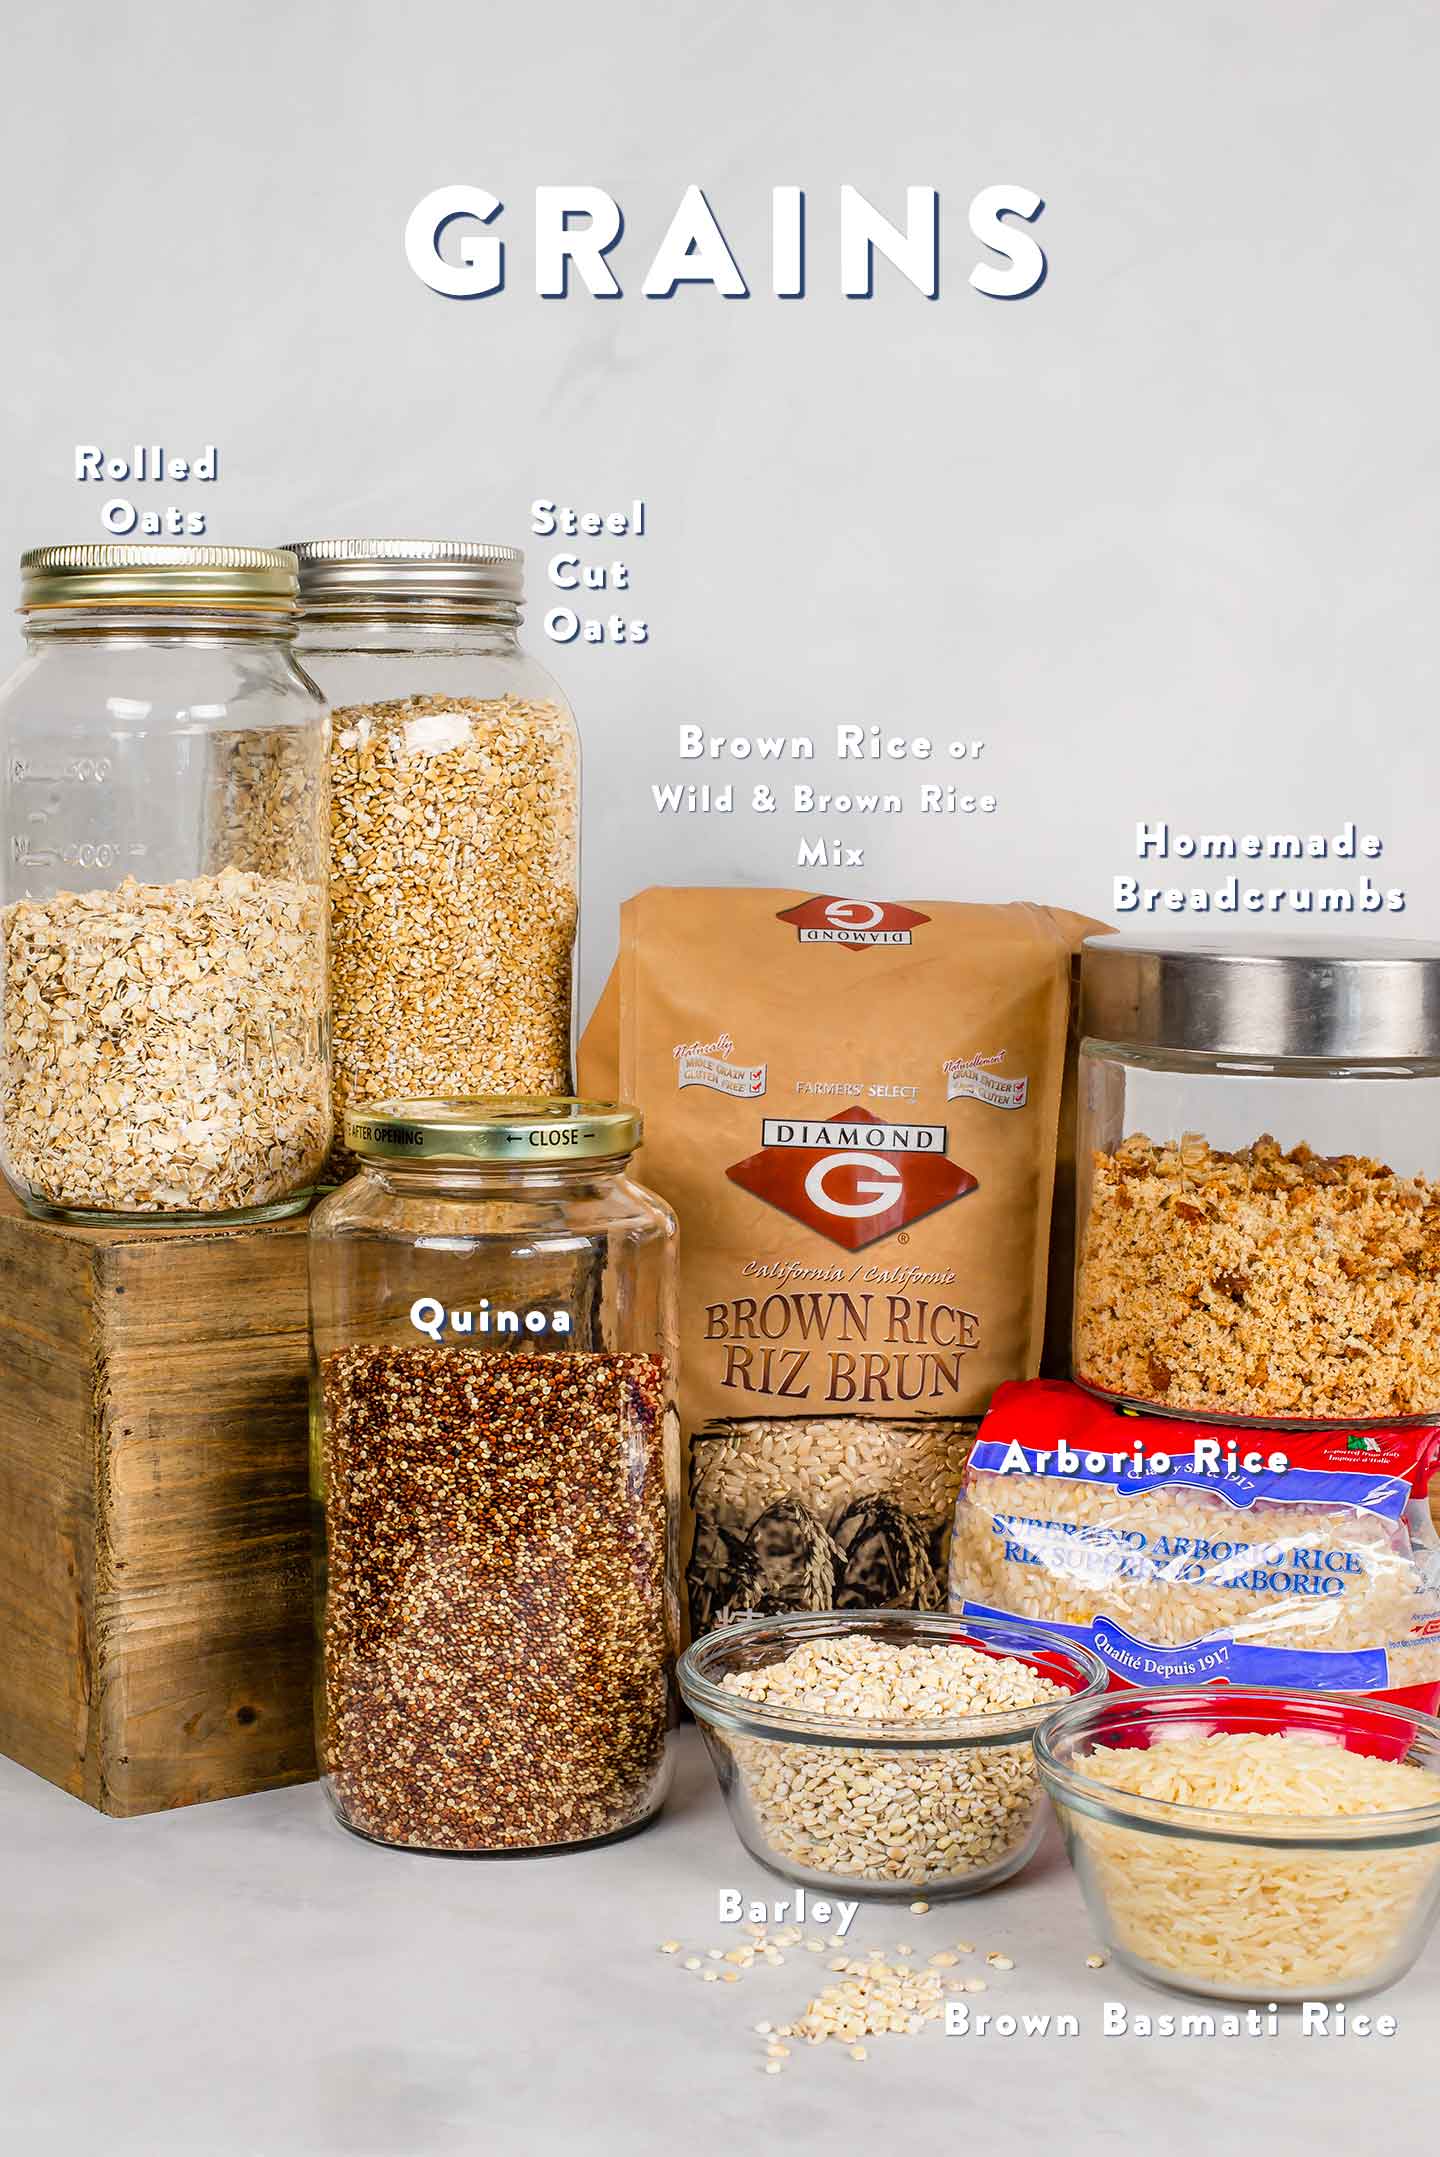 A grouping of grains including oats, quinoa, brown rice and breadcrumbs.